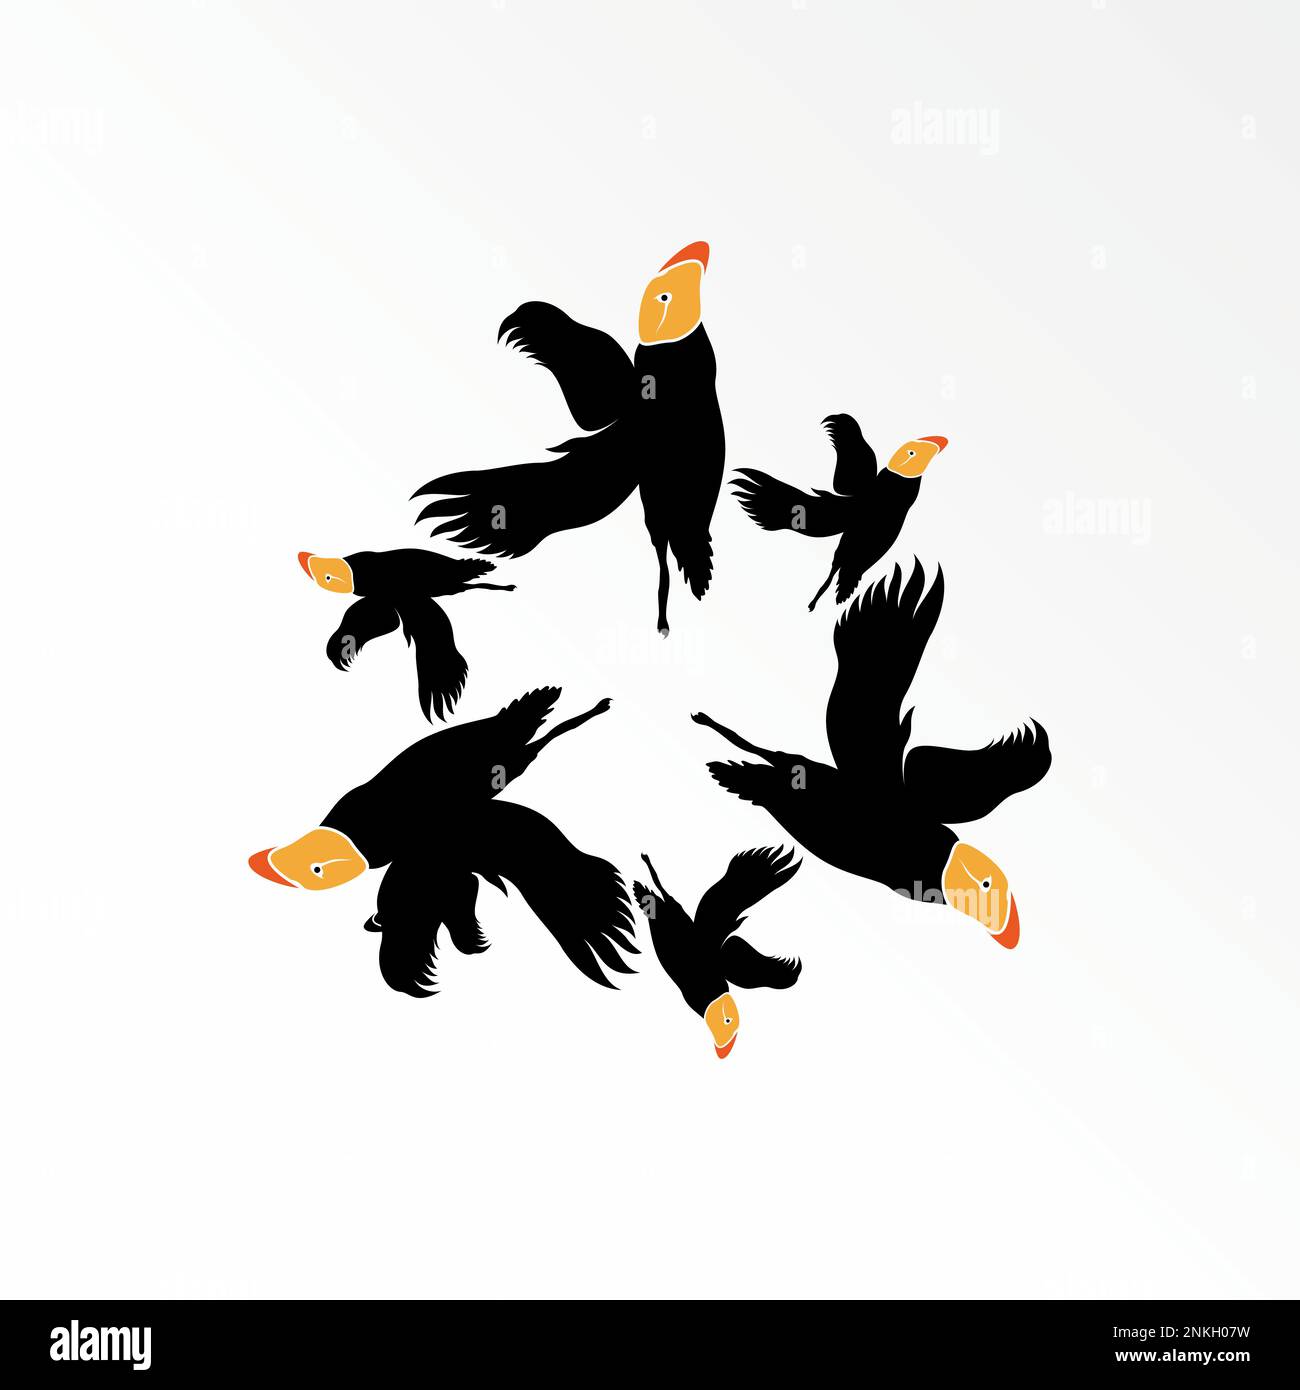 Unique and simple puffin bird in flying around image graphic icon logo design abstract concept vector stock. symbol related to animal or community Stock Vector